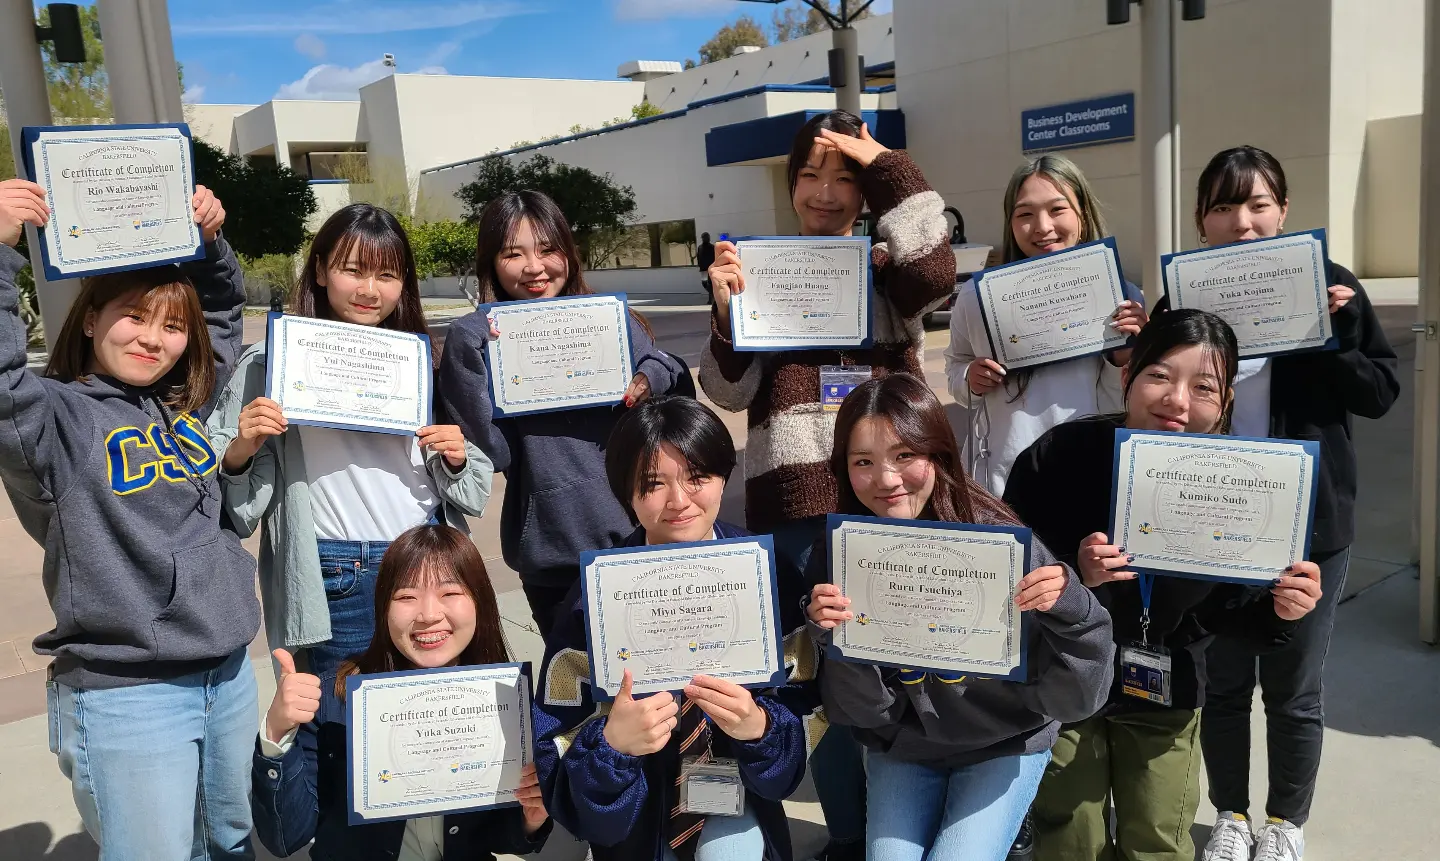 A group of international students holding up certificates